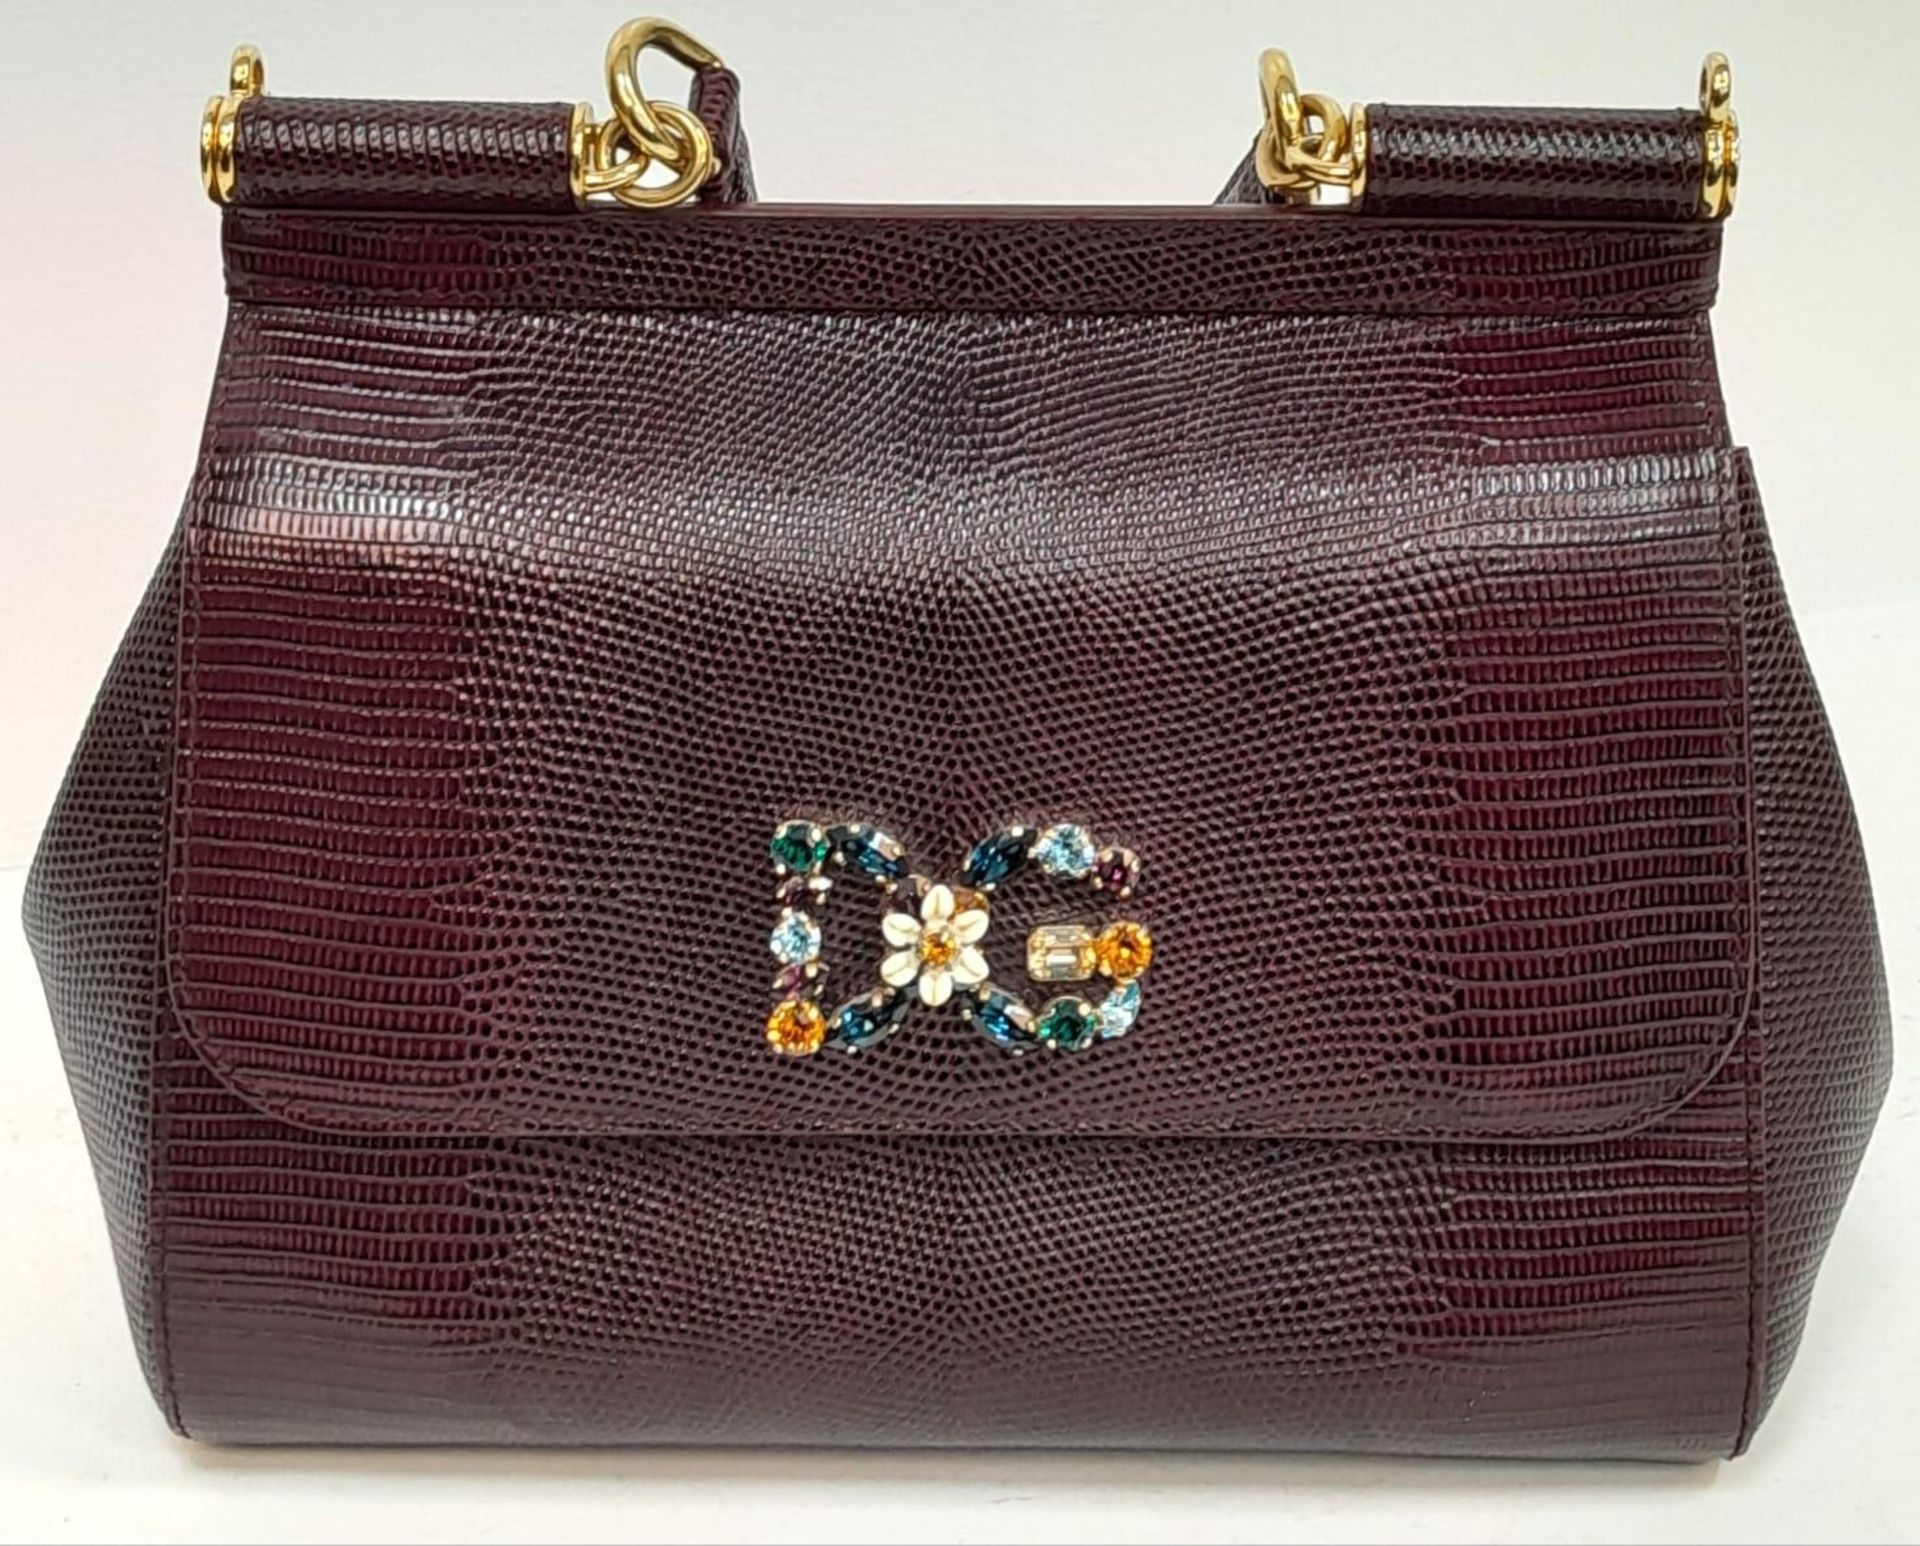 A Dolce & Gabbana Burgundy Miss Sicily Bag. Reptile embossed leather exterior with gold-toned - Image 2 of 6